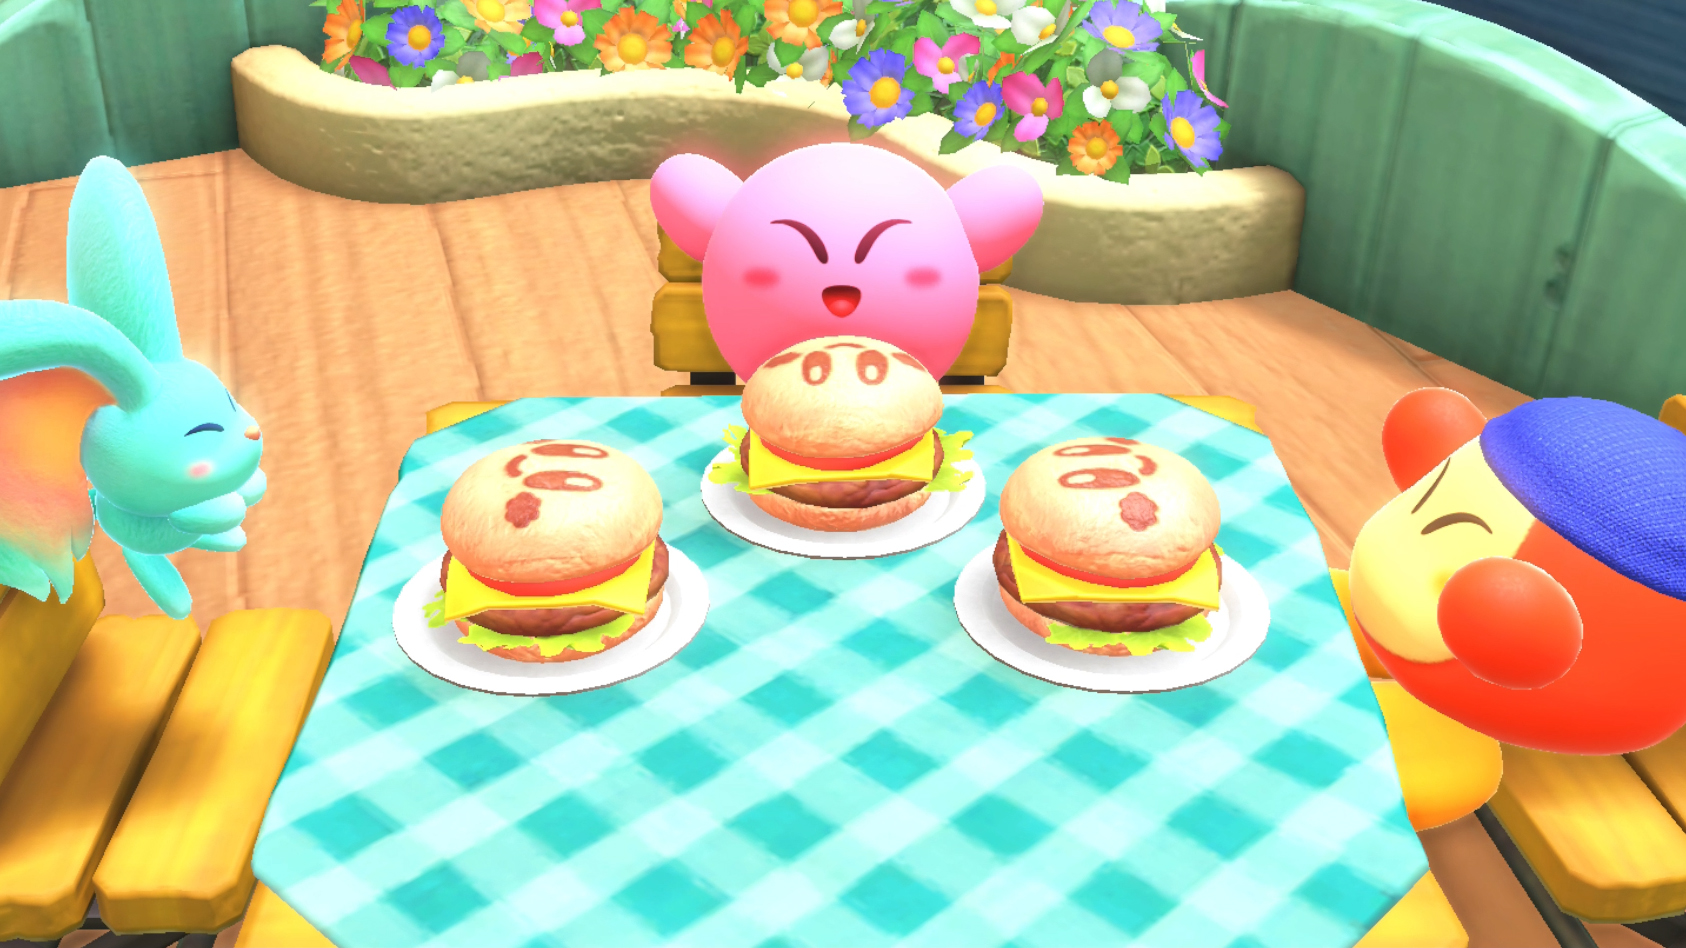 Nintendo Direct: Kirby eating burgers in the game Kirby and the Forgotten Land